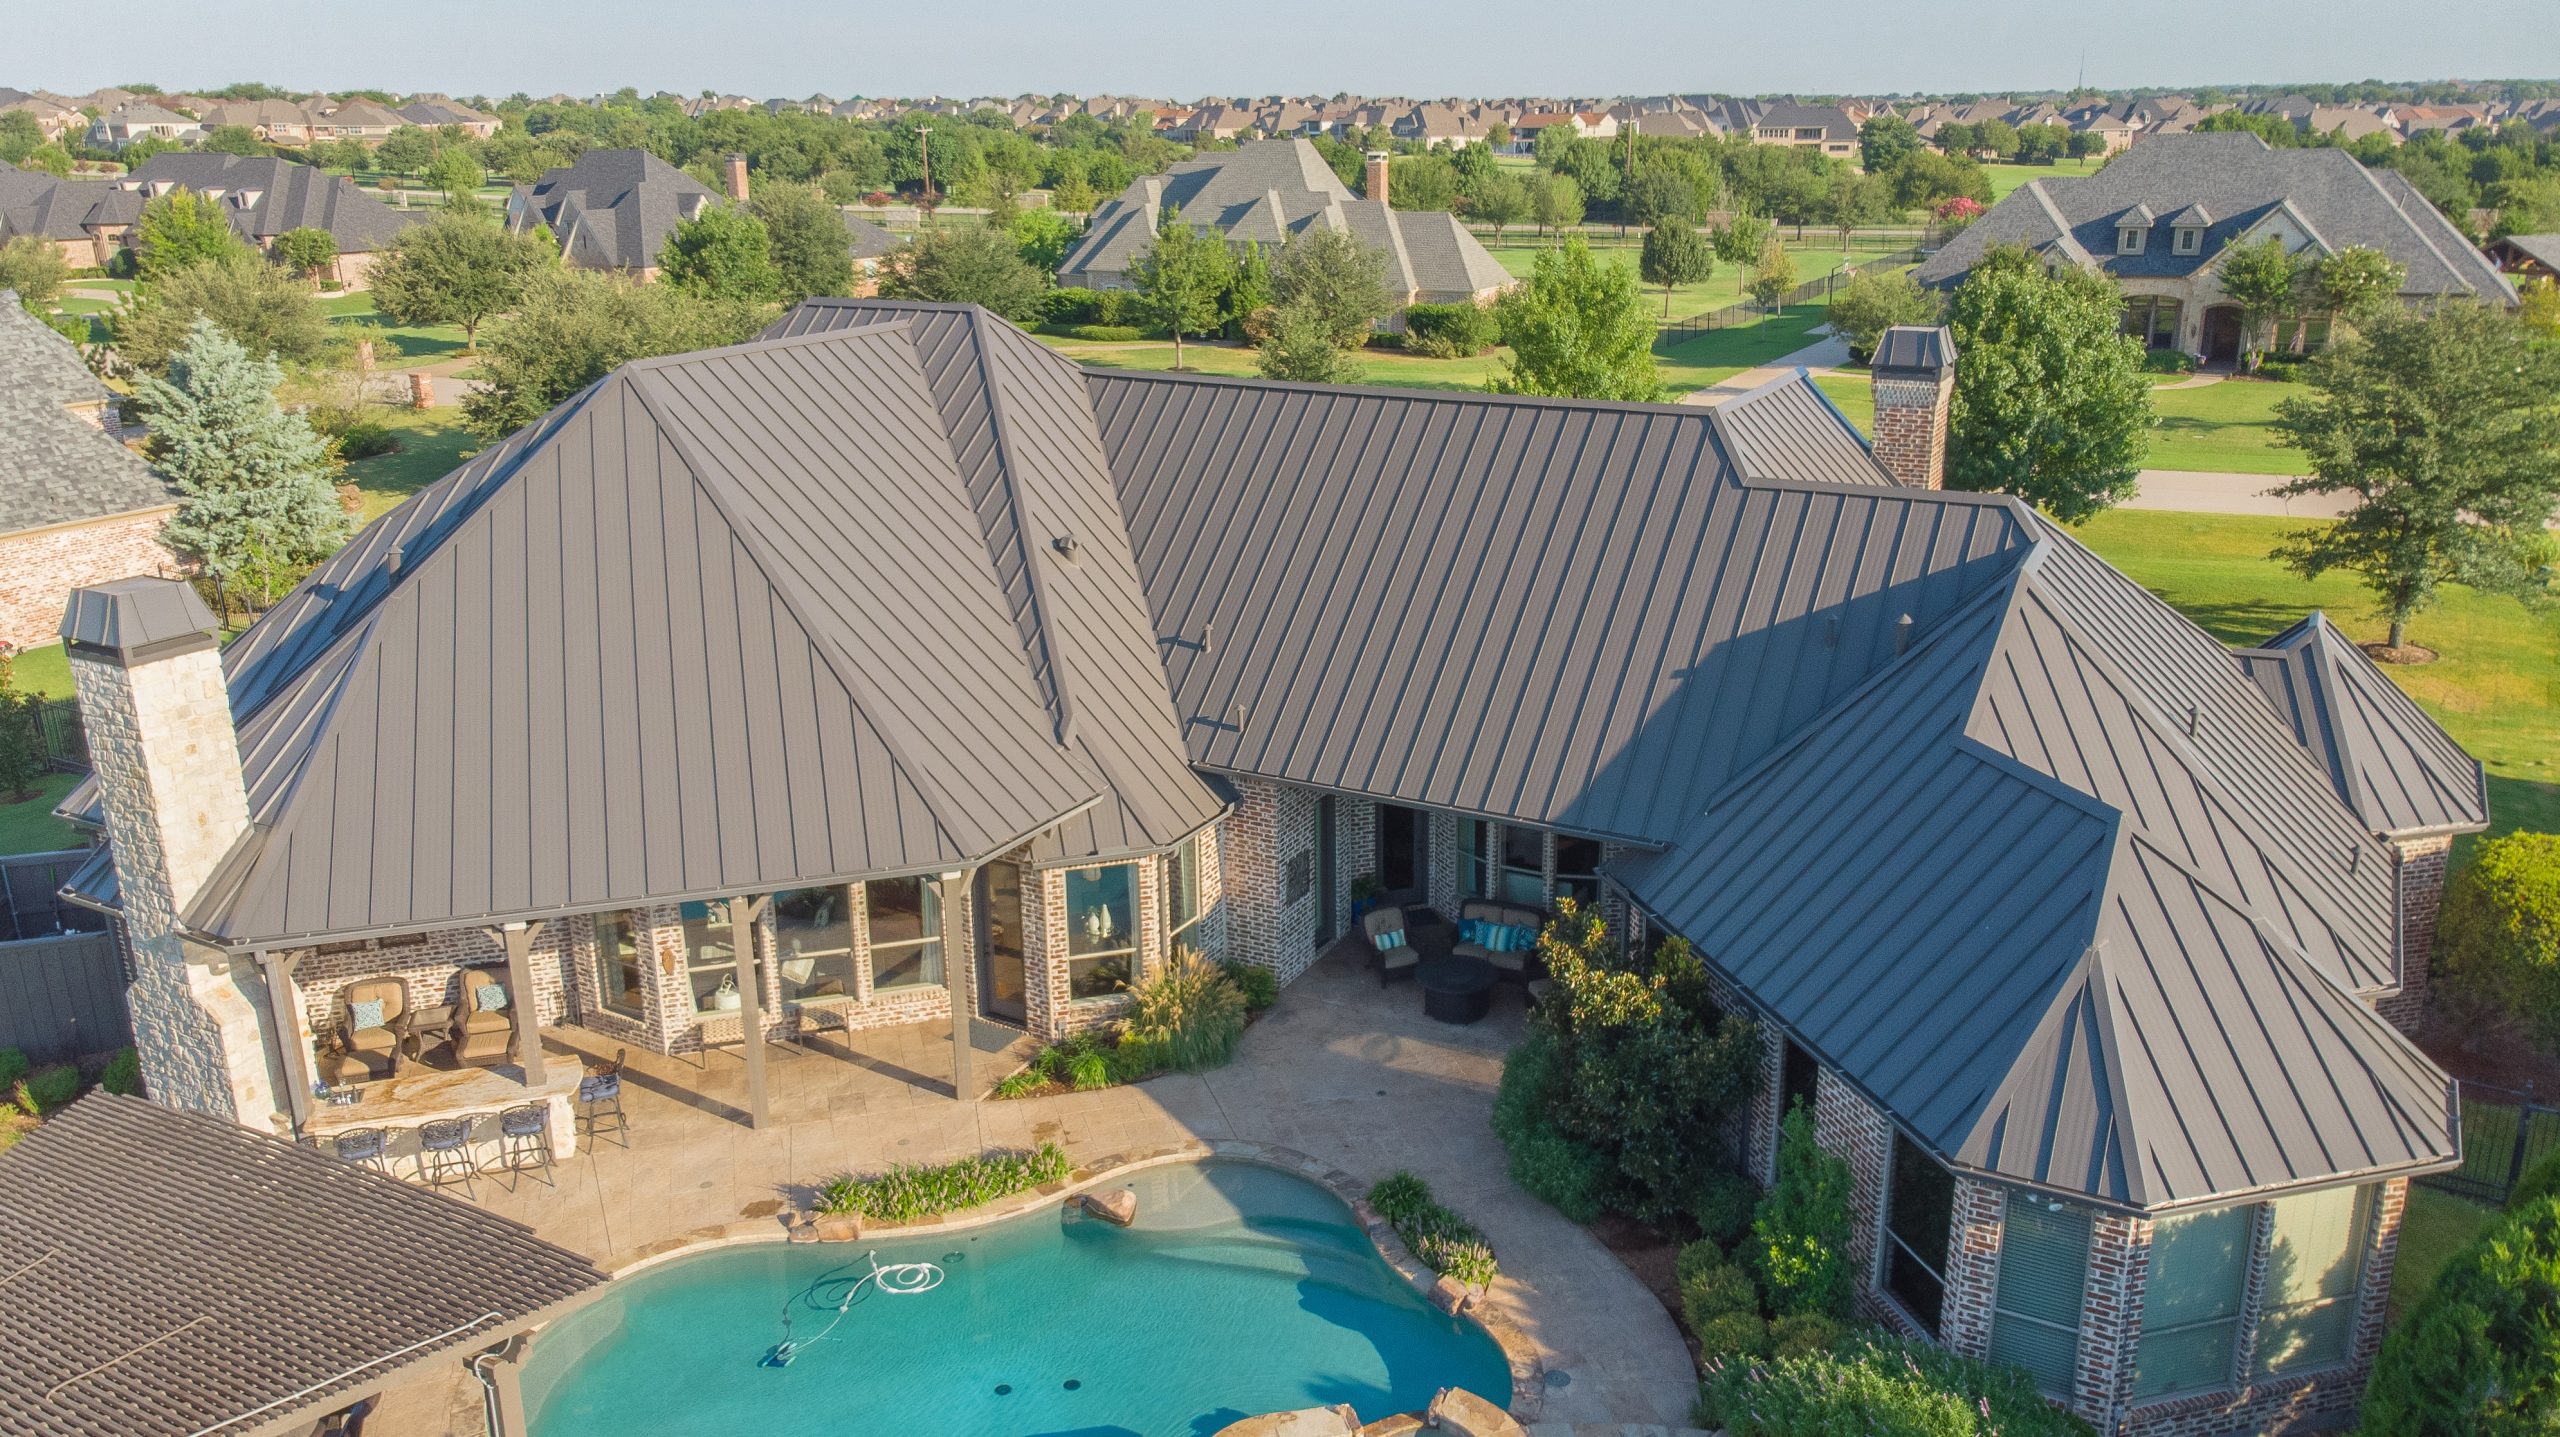 Residential Project in Prosper, Texas features standing-seam roofing